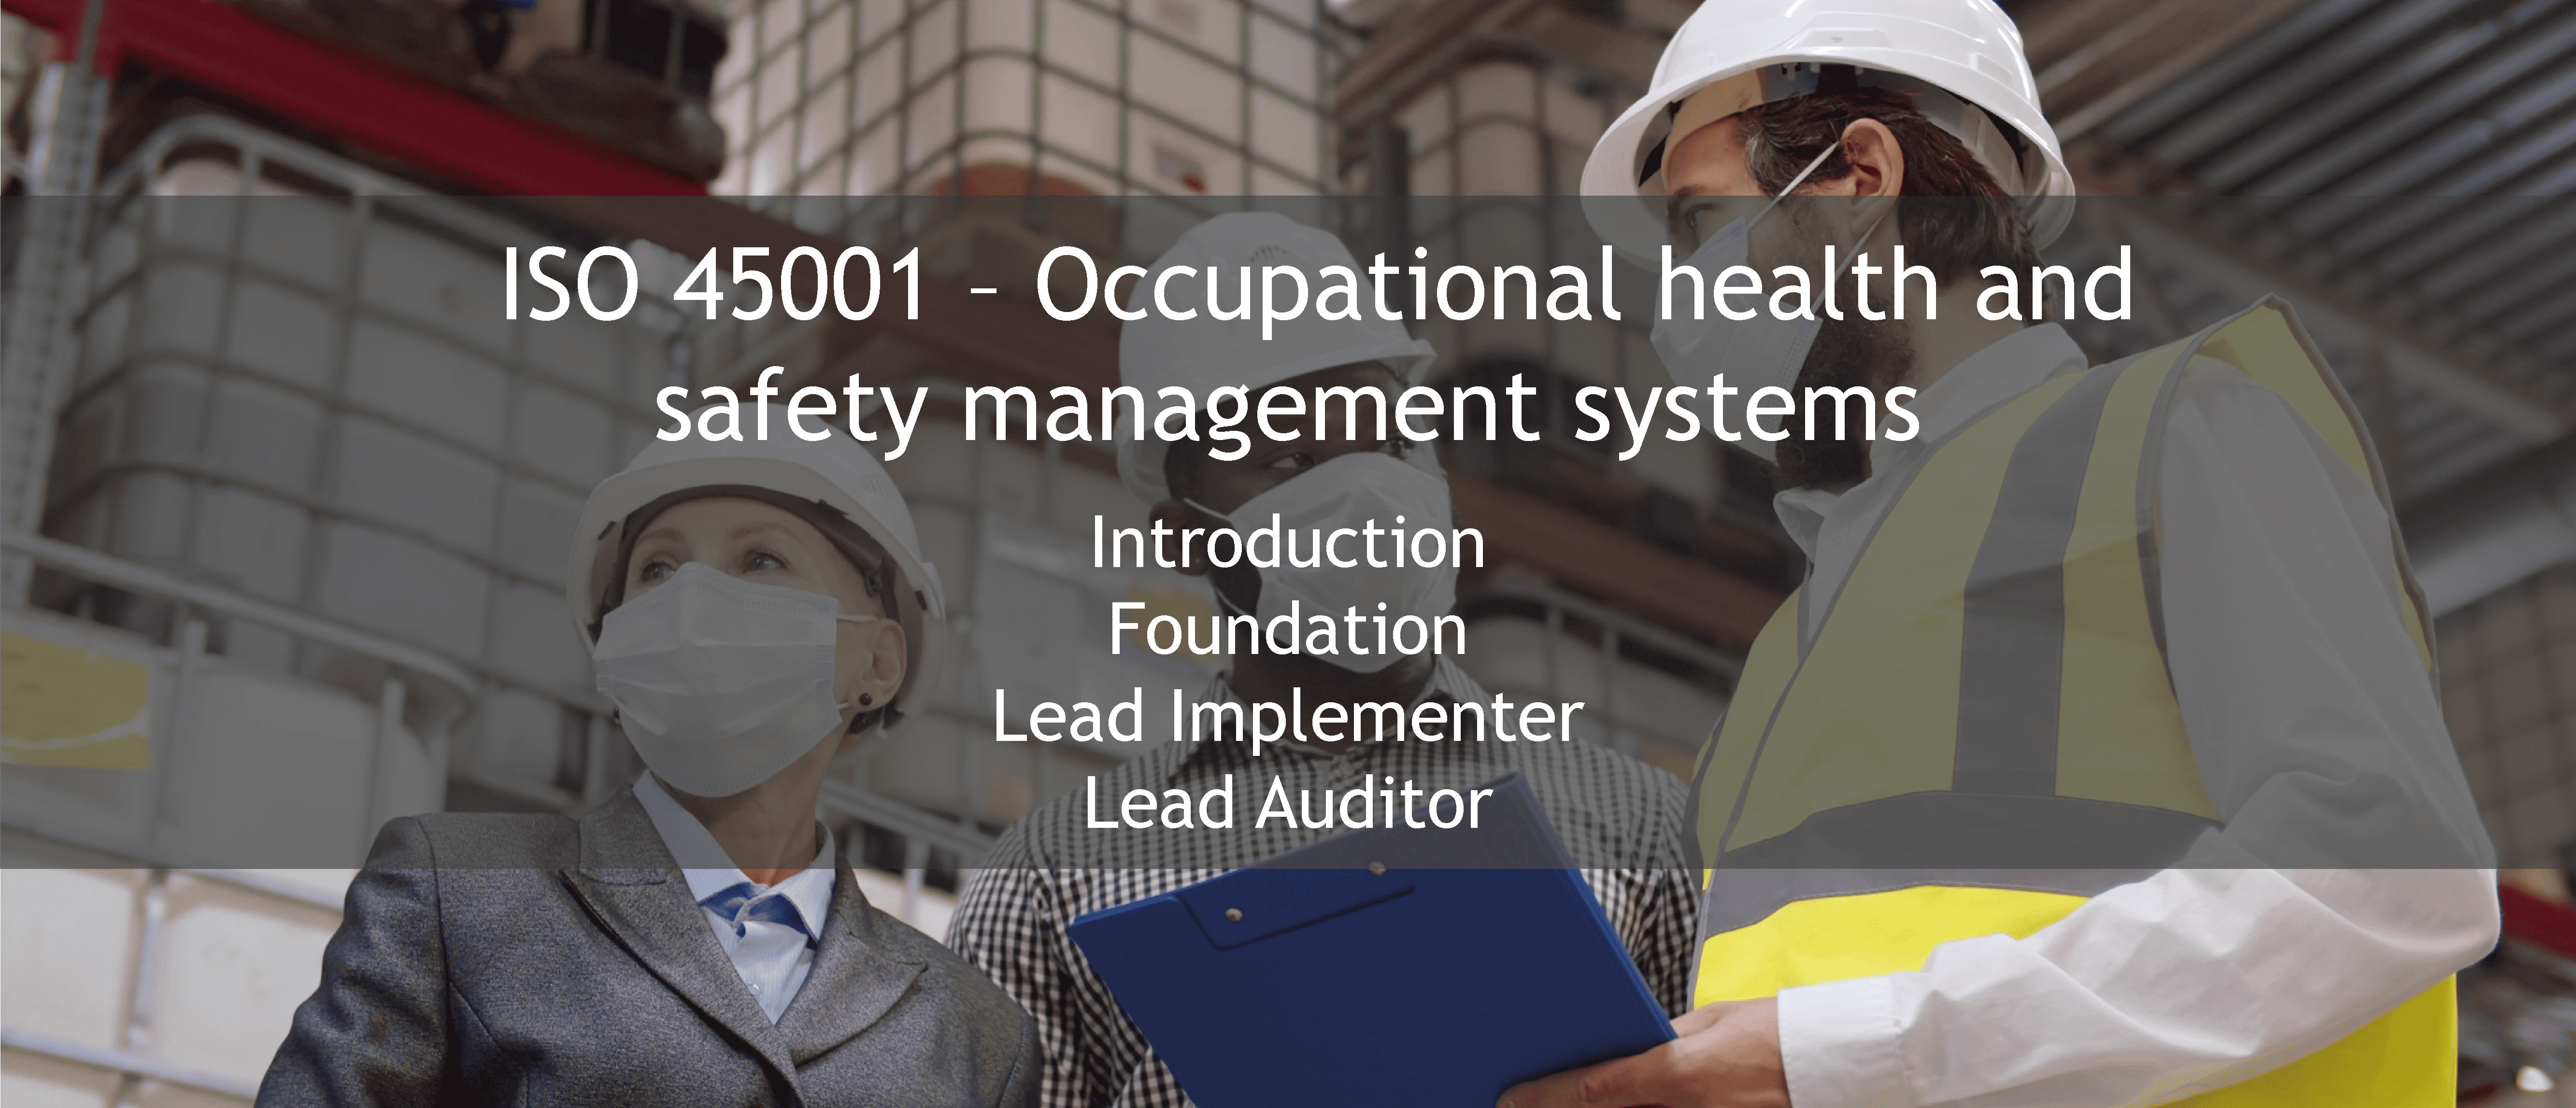 ISO 45001 training offer - Accueil